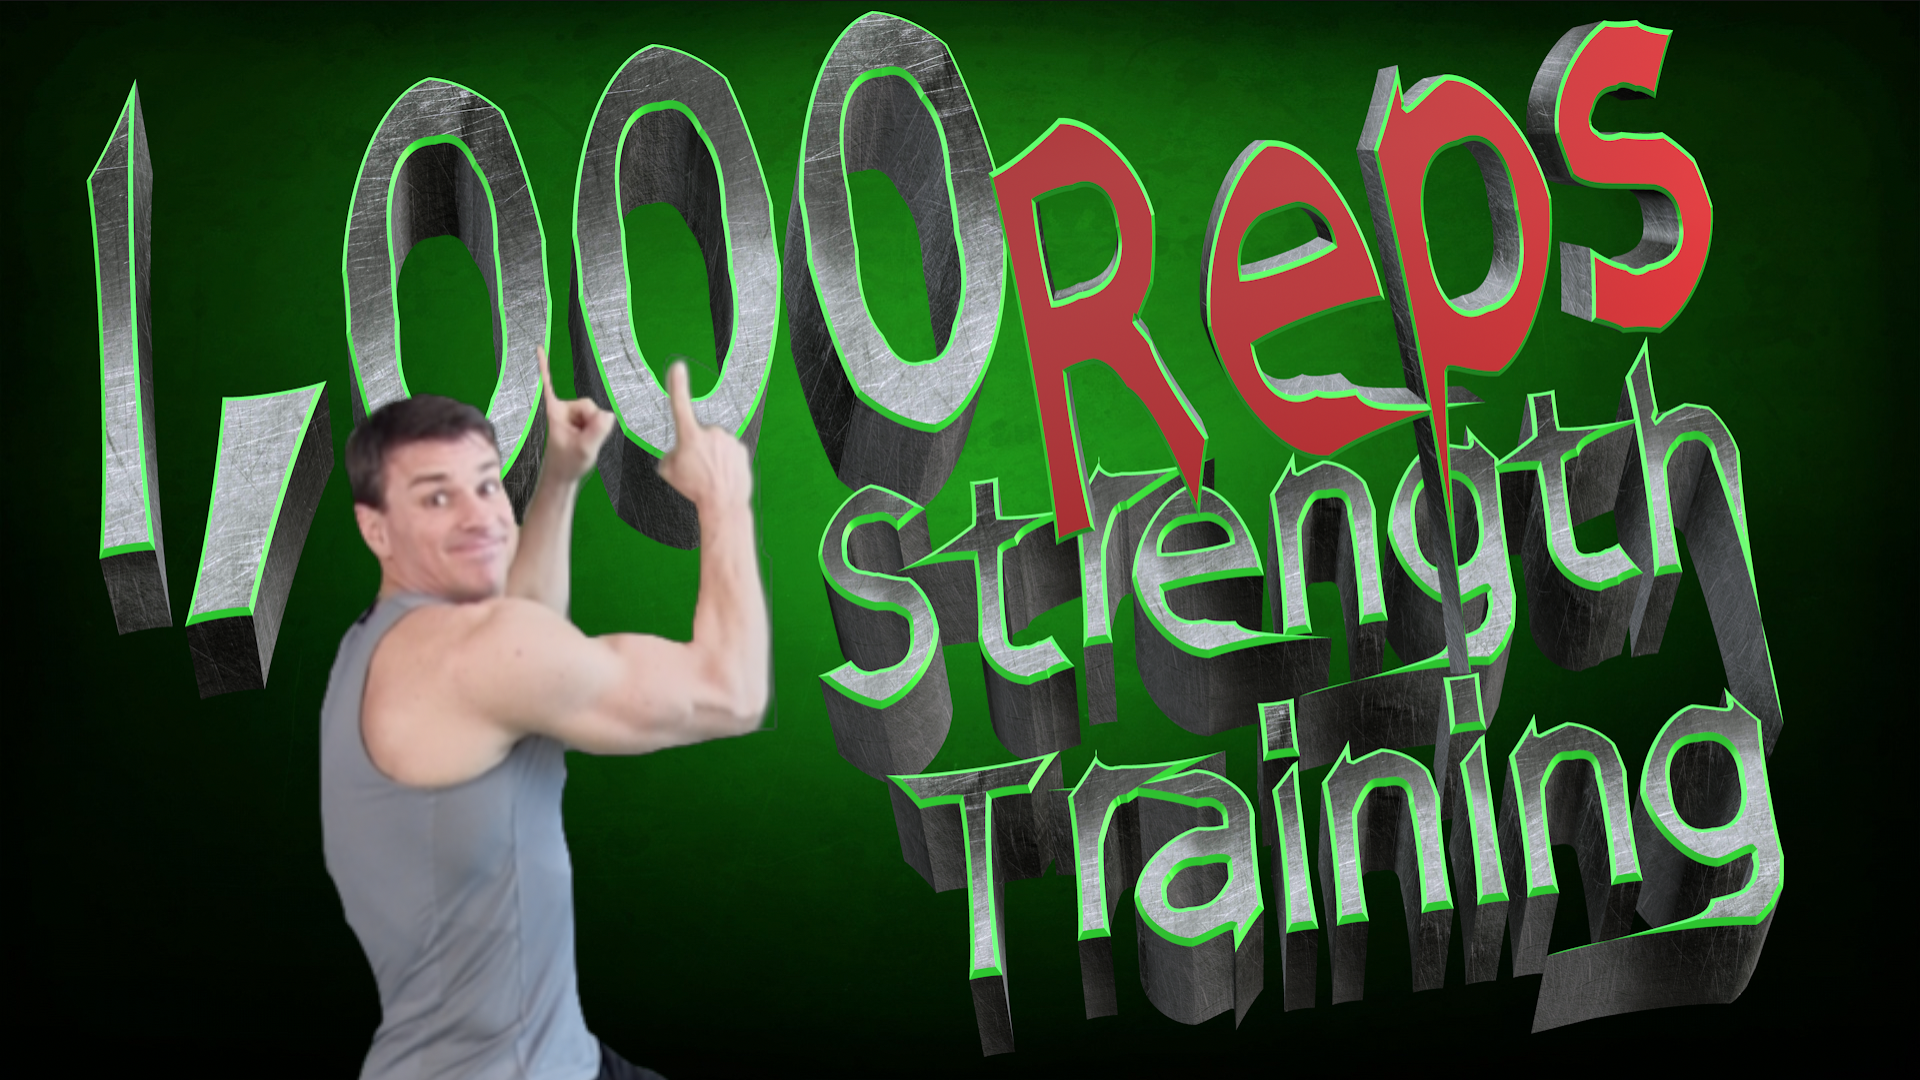 relentless fit 365 1000 reps strength training workout